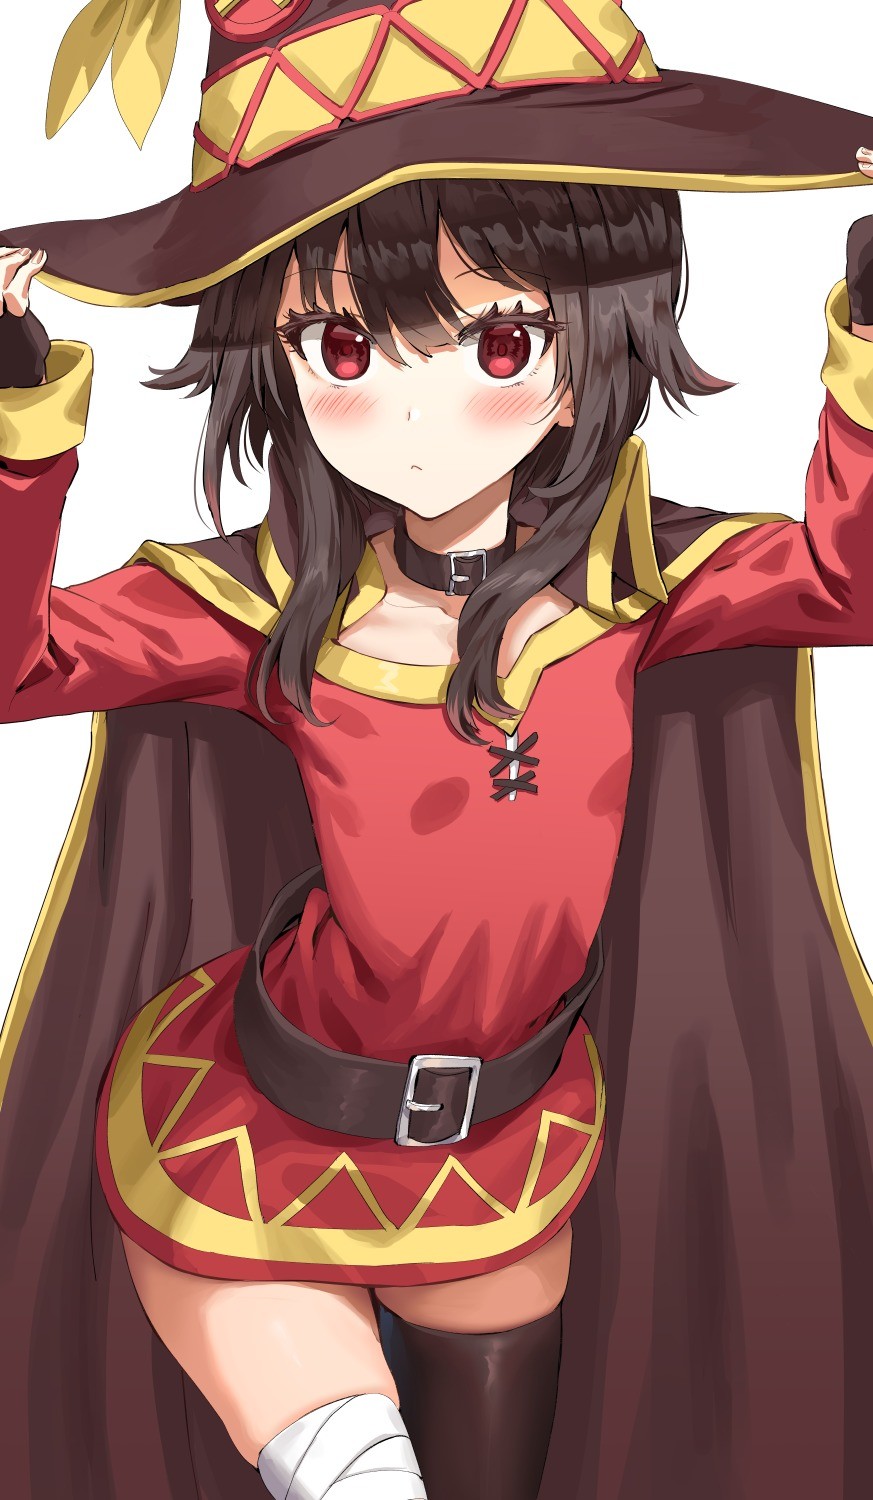 Daily Megu - 993: Big Hat. join list: DailySplosion (827 subs)Mention History Source: .. god i love megumin